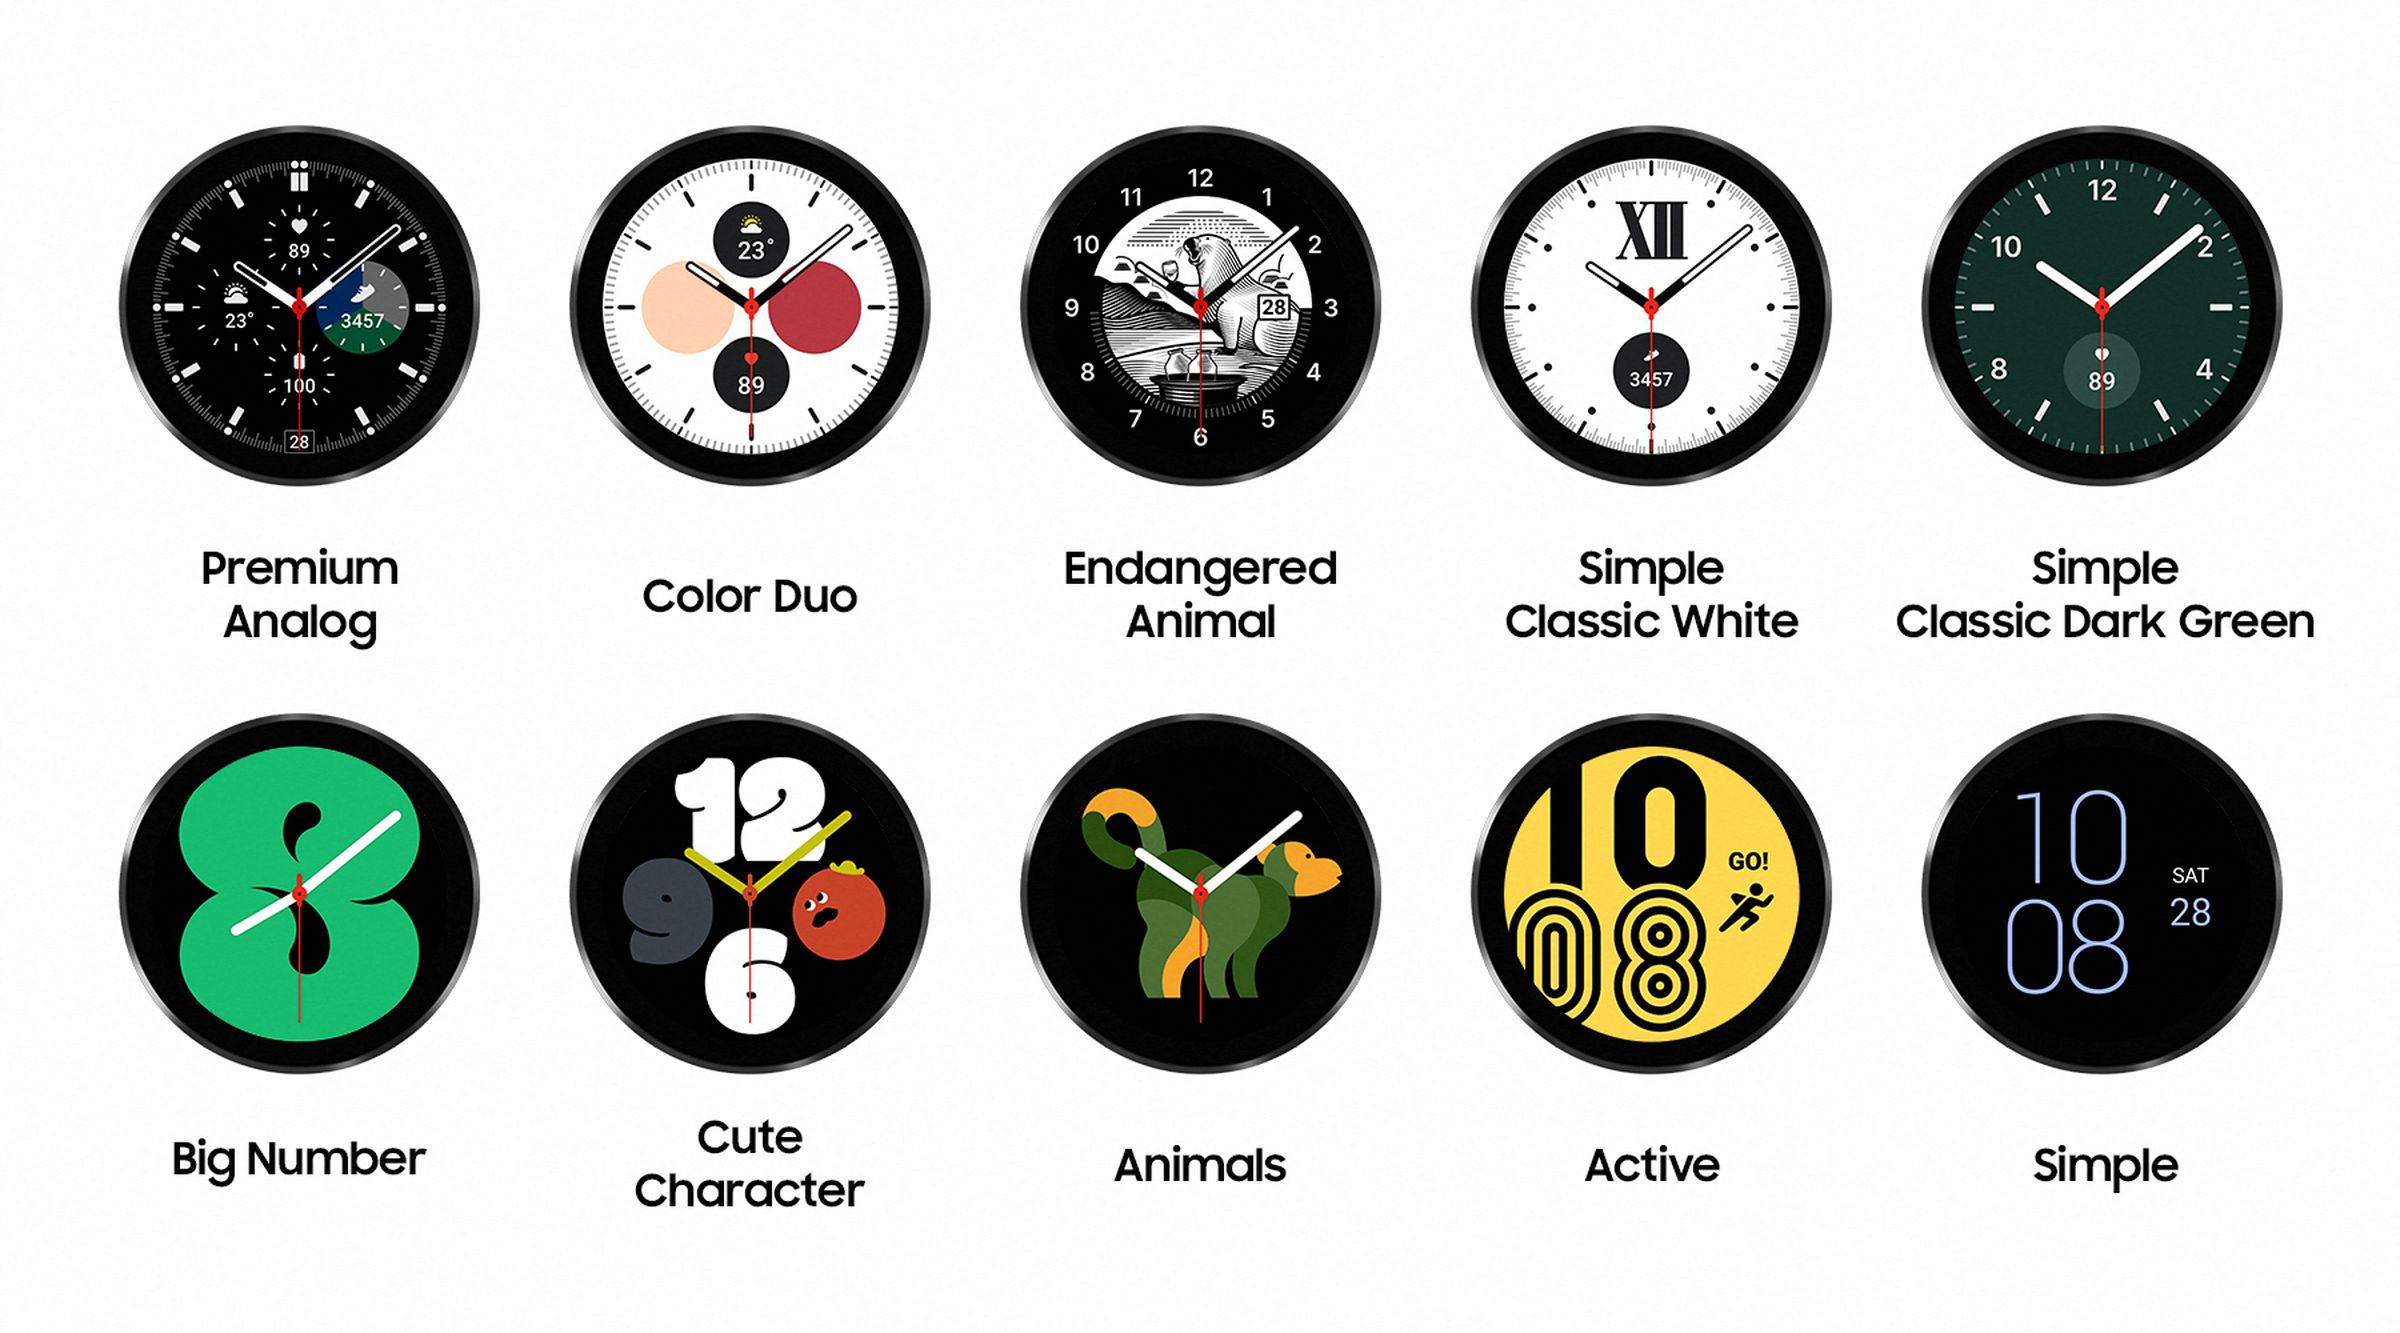 A showcase of the 10 new watch faces